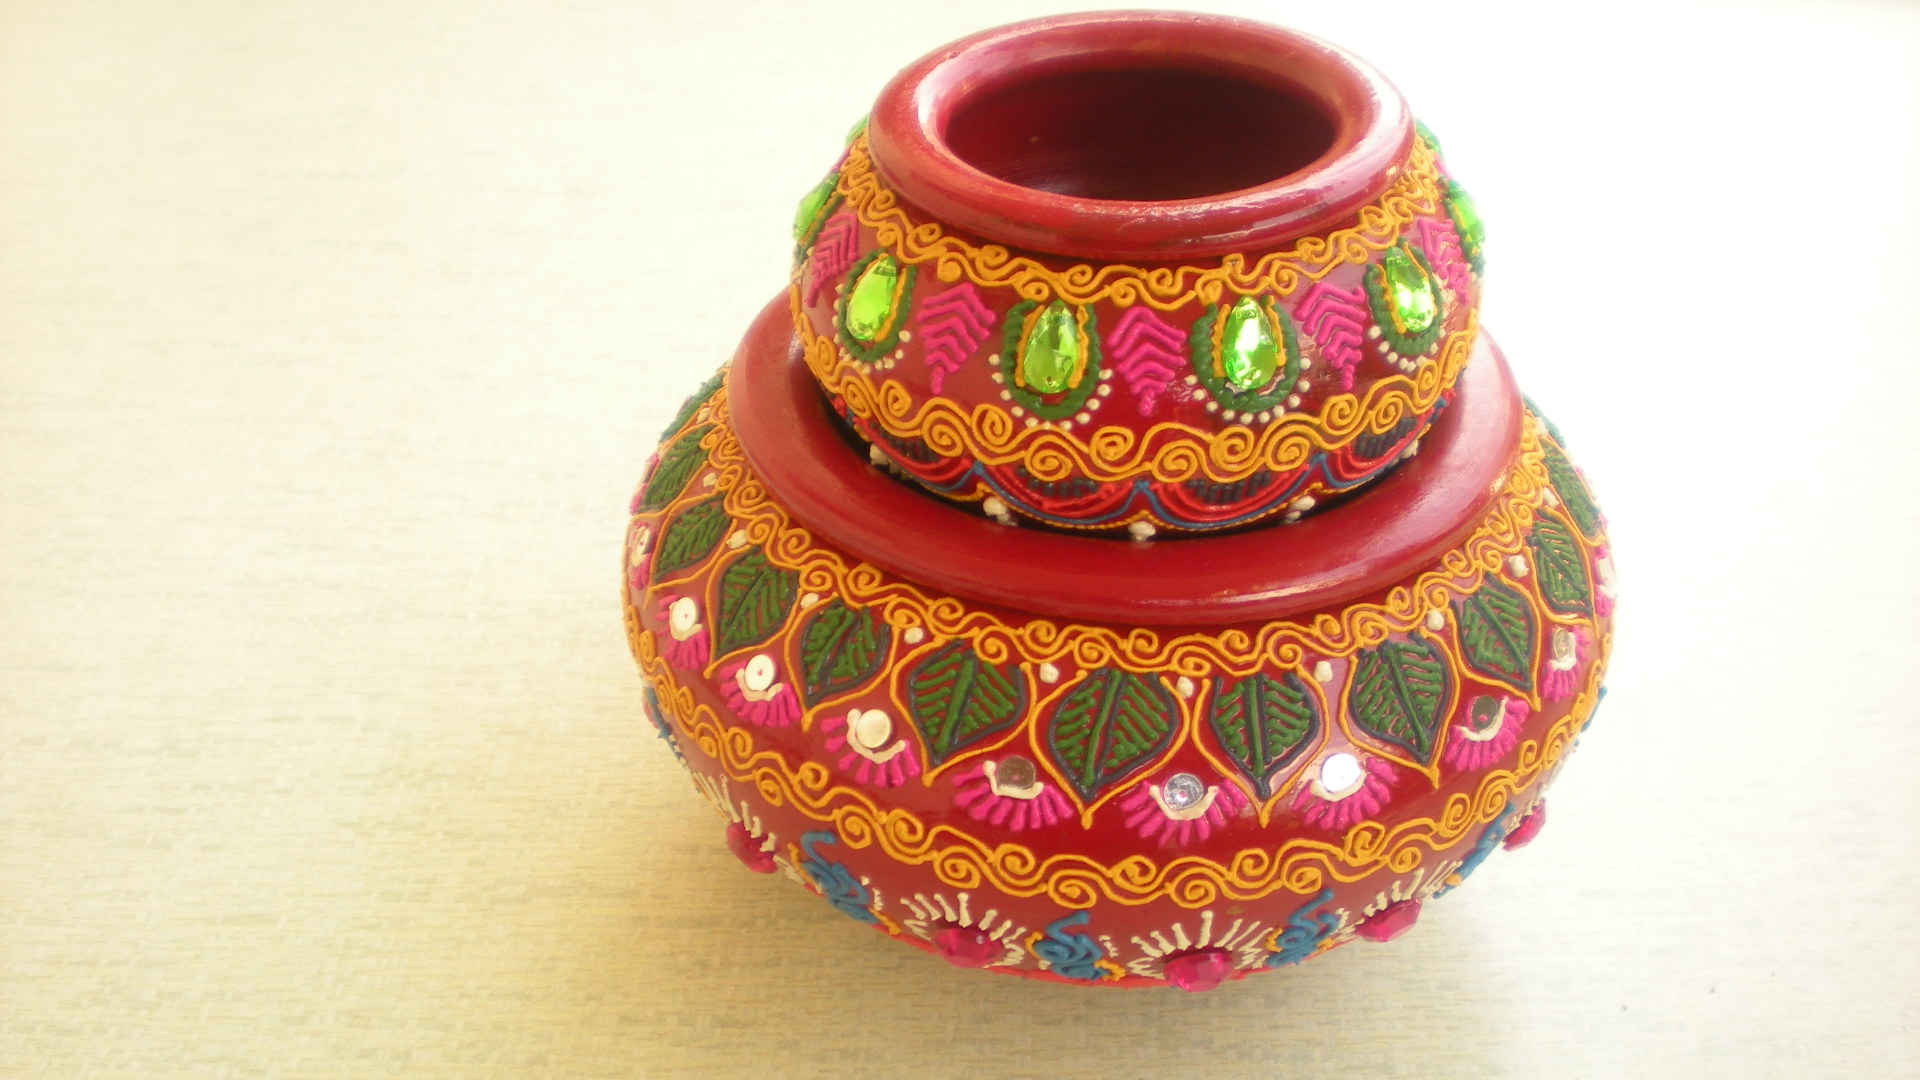 Manufacturers Exporters and Wholesale Suppliers of Wooden Handicraft and Rukhwat Material 02 Nagpur Maharashtra